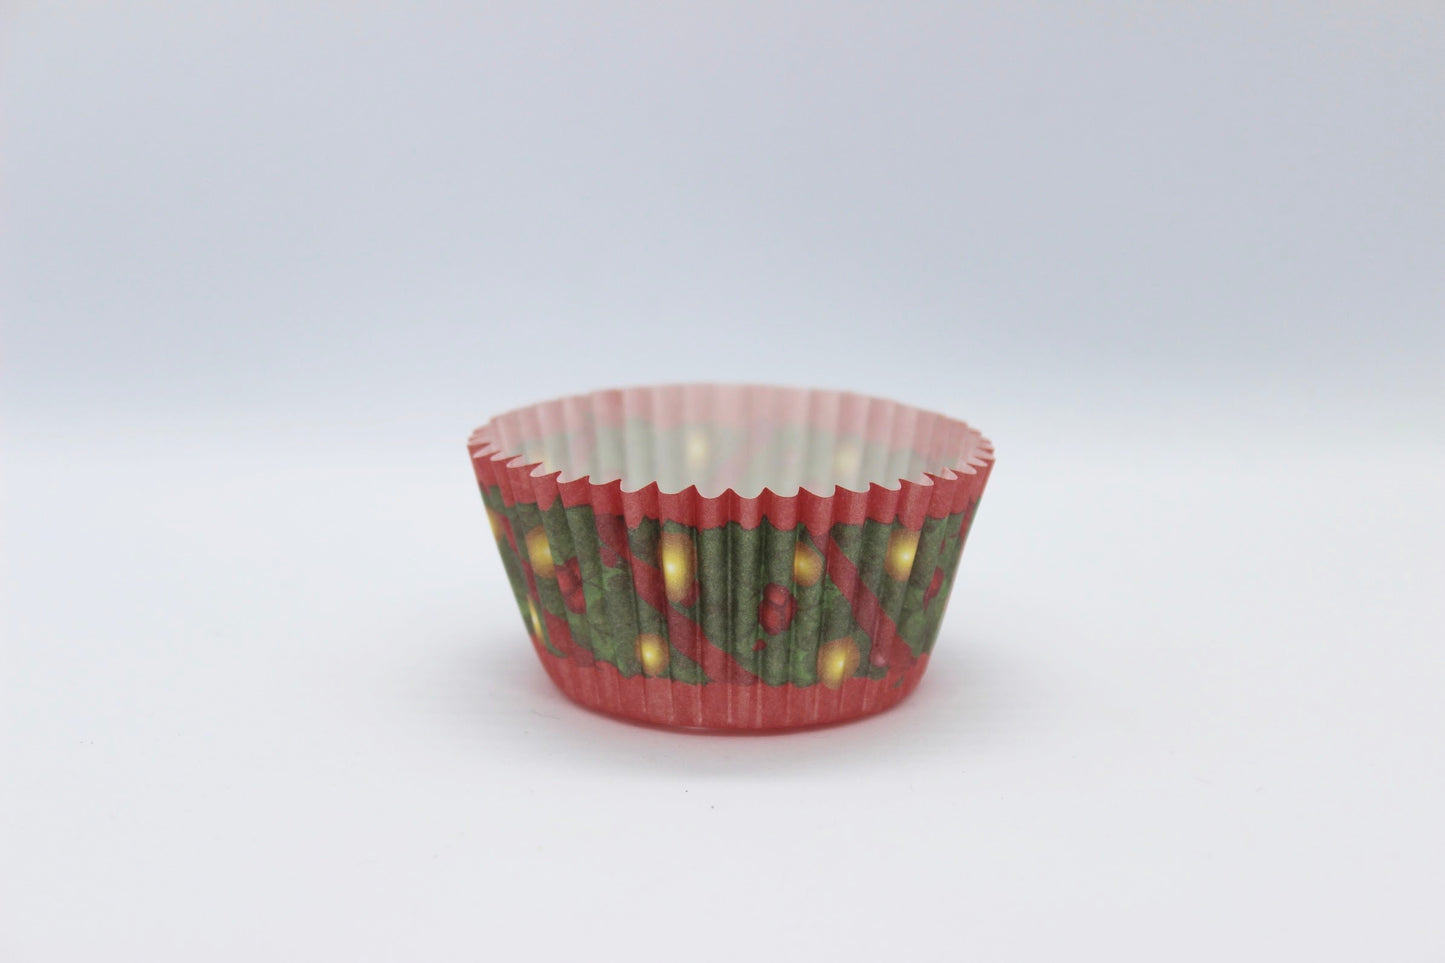 Christmas Cup Cake Liners in Assorted Sizes and Patterns Pkts of 100's or 500's